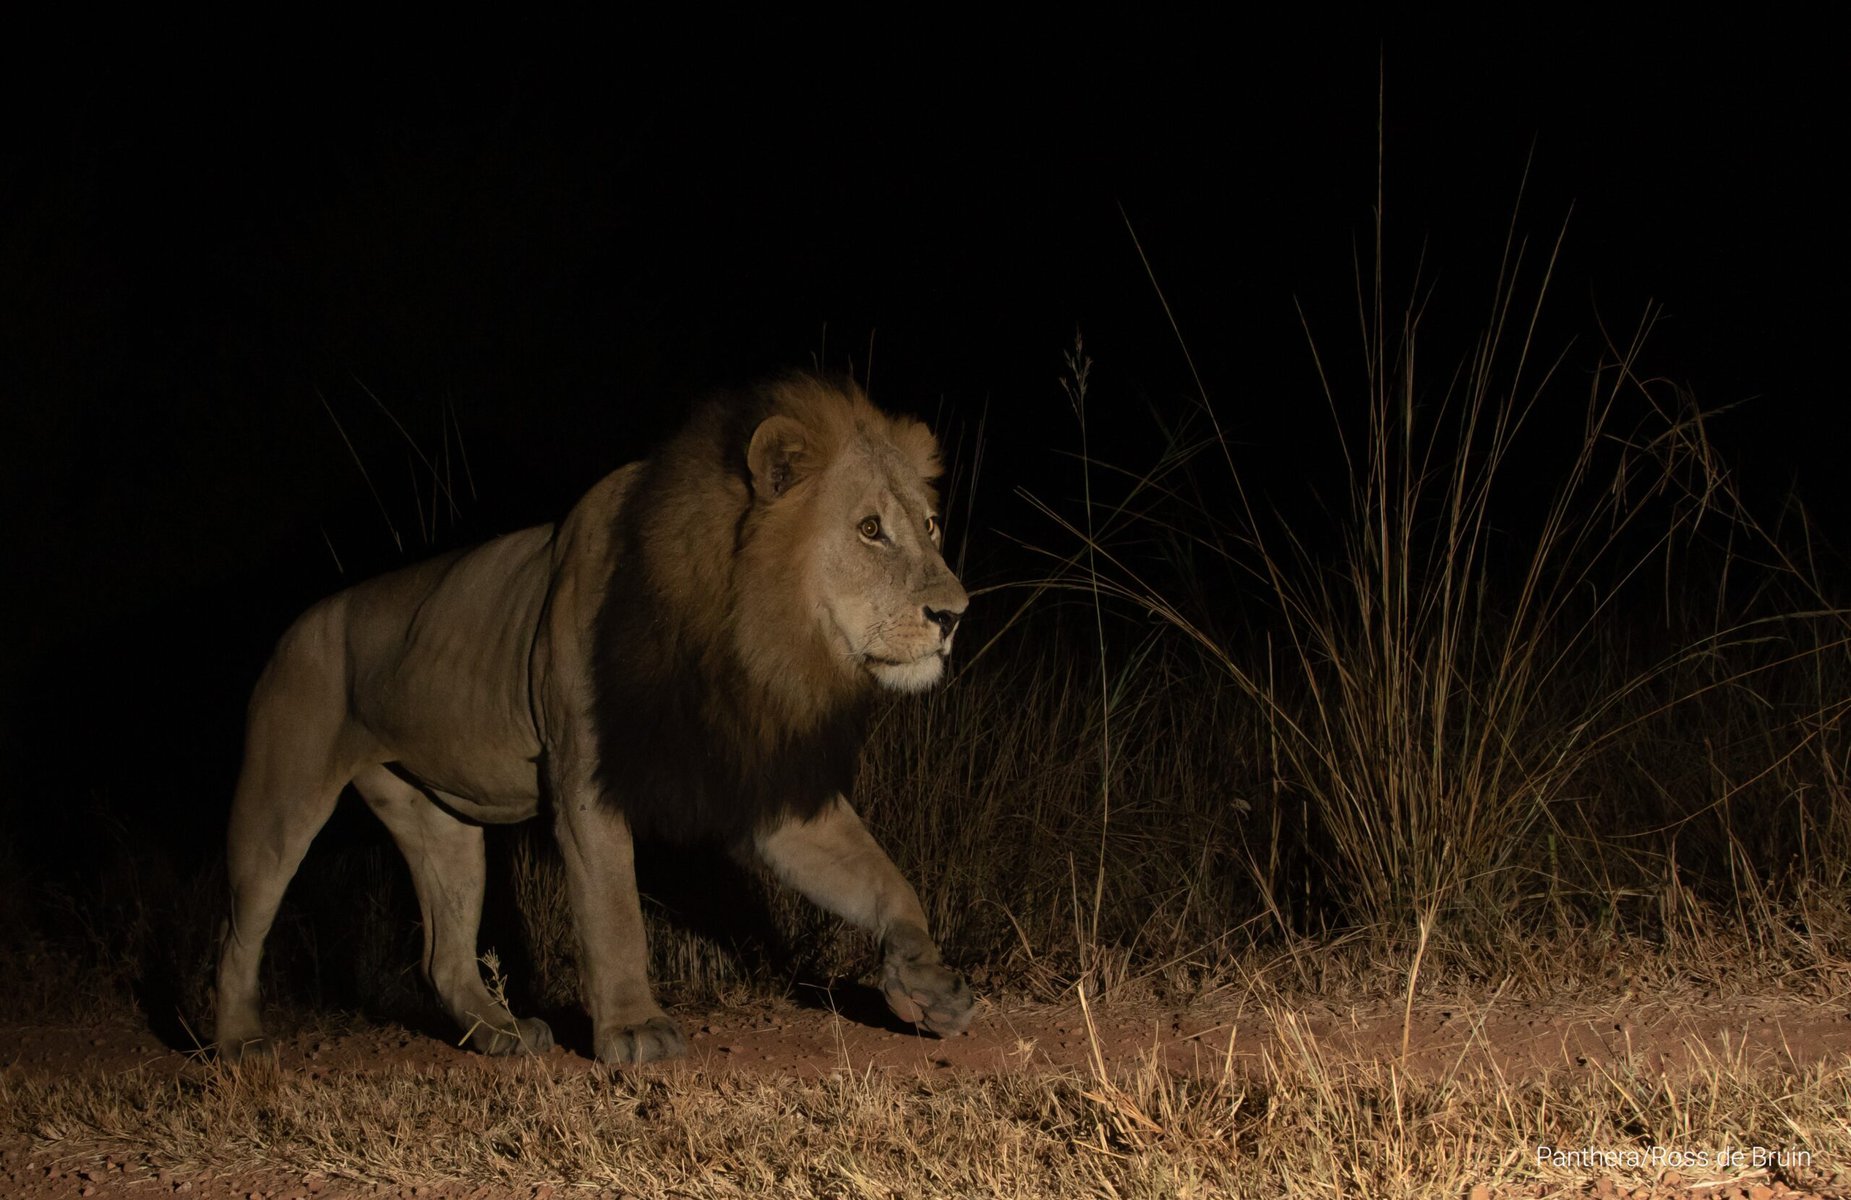 A male lion passes a camera trap near Panthera's camp in Kafue National Park.